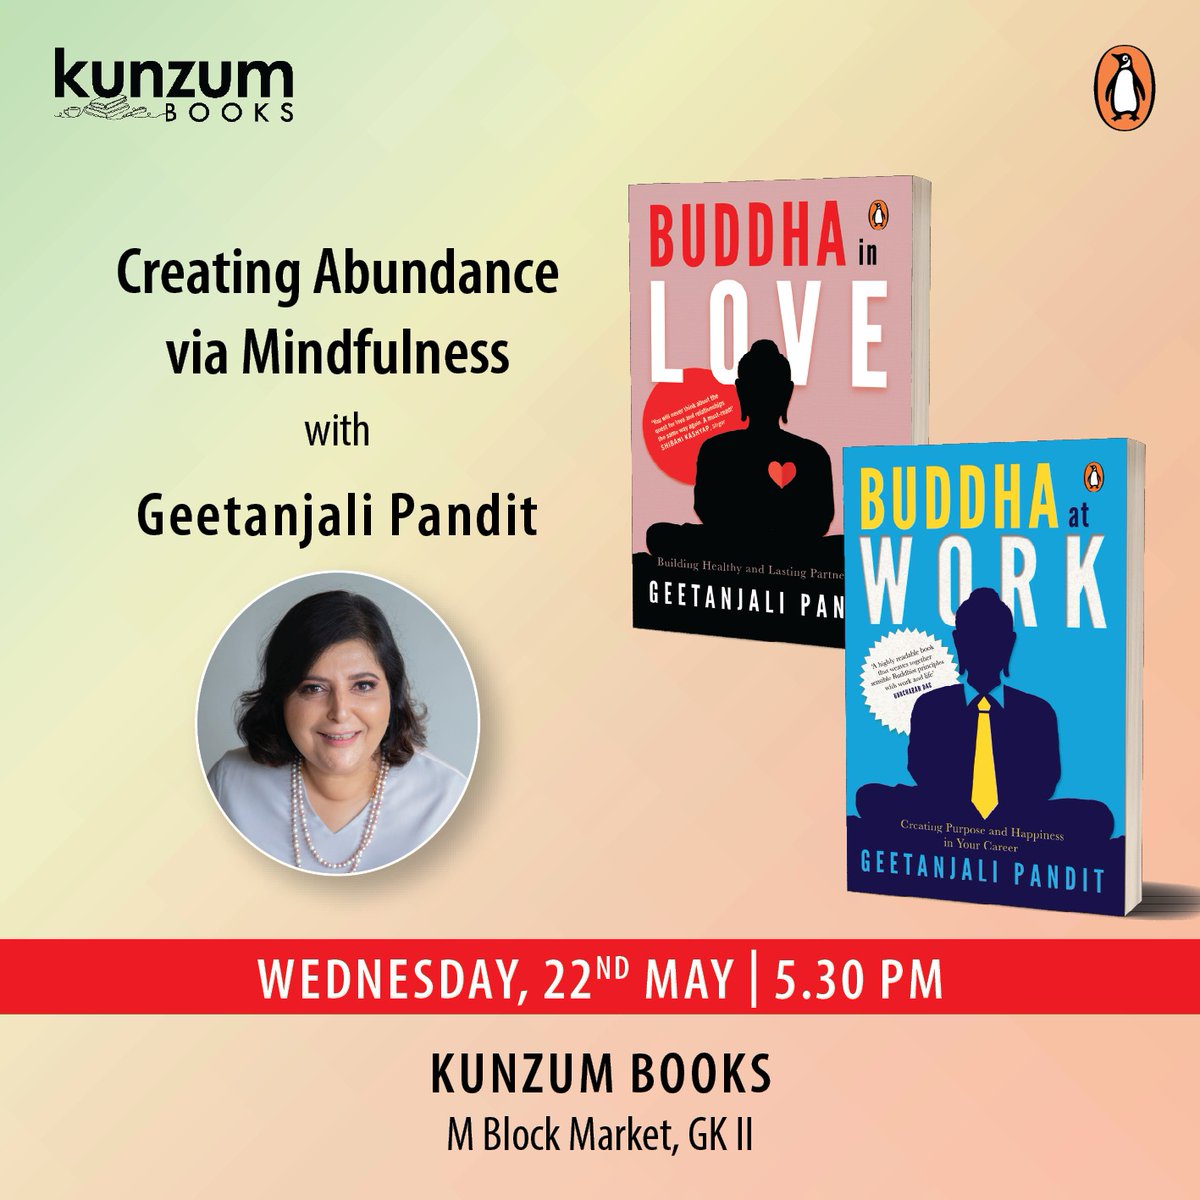 Join Geetanjali Pandit at Kunzum Books this Wednesday, May 22nd, at 5:30 PM for a session on 'Creating Abundance via Mindfulness.' Learn how to cultivate a mindful approach to build a fulfilling life and career with the author. 

#Mindfulness #BookEvent #Delhi
@penguinindia